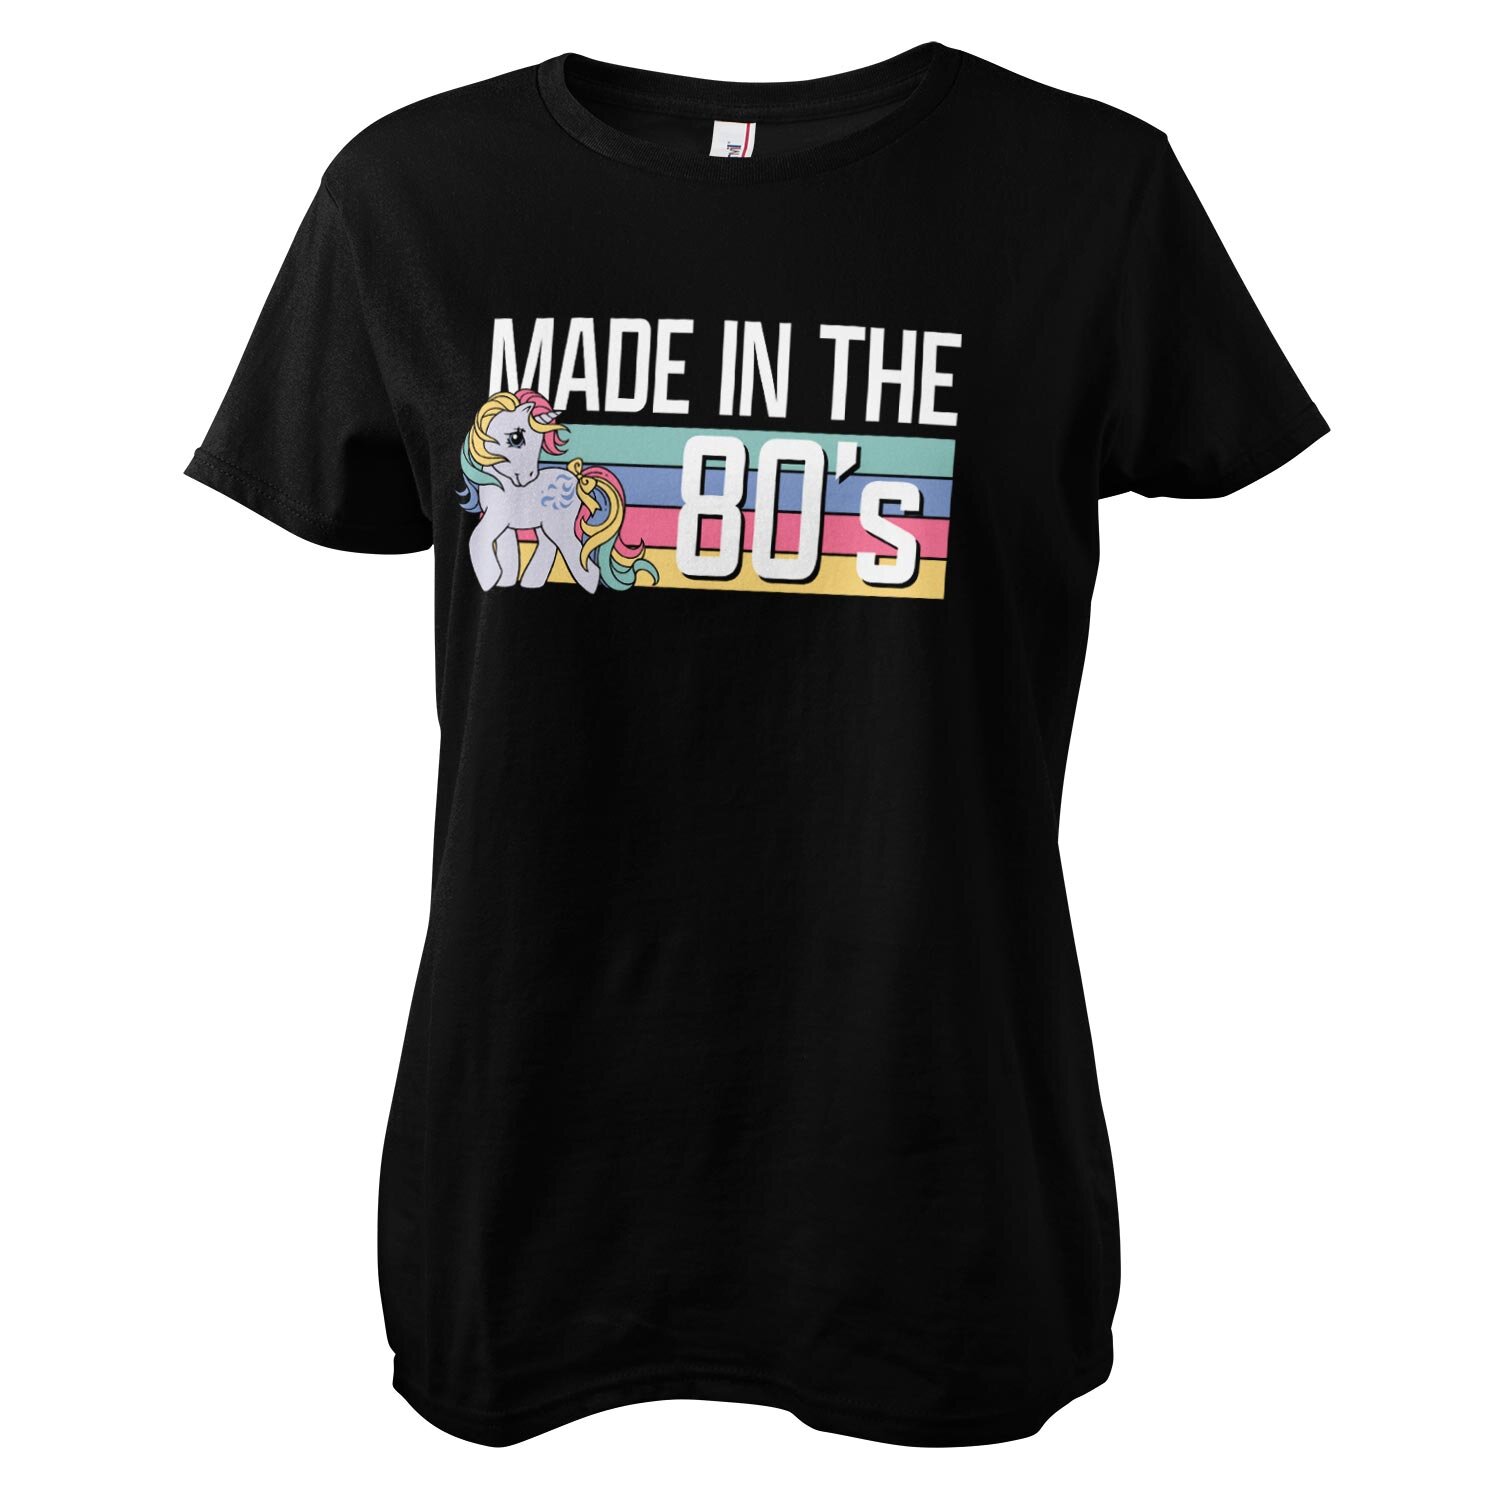 My Little Pony - Made In The 80's Girly Tee